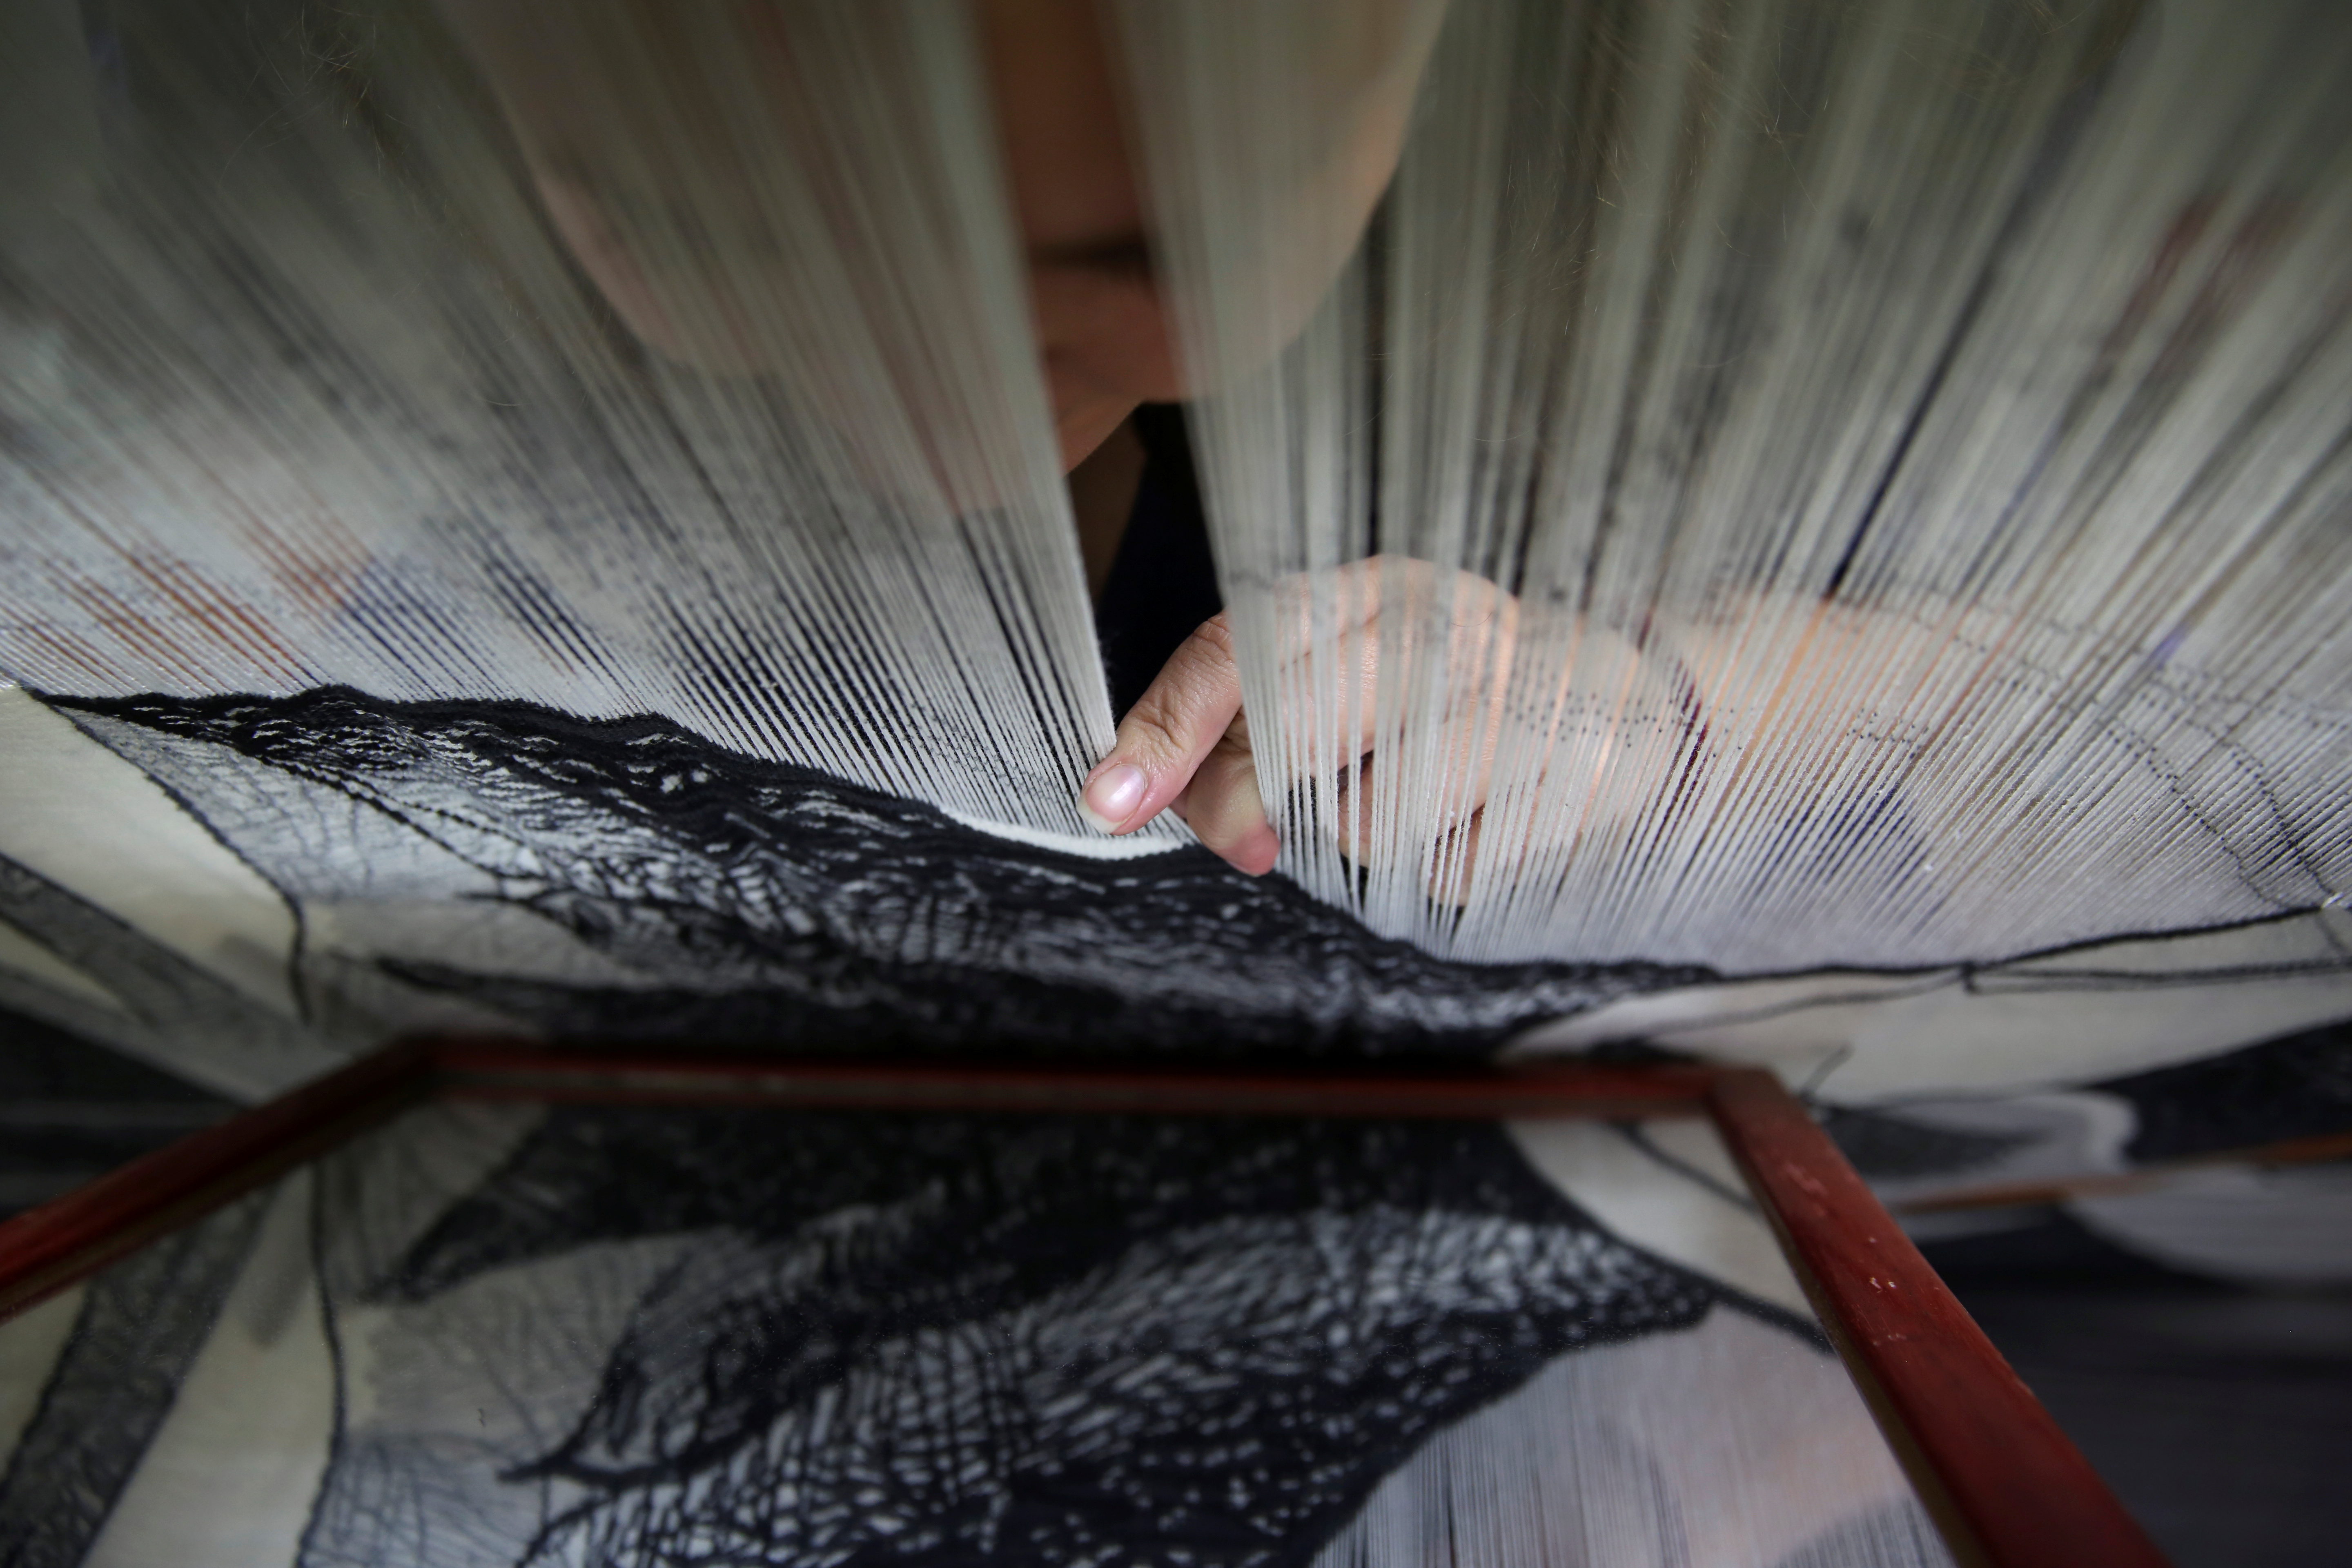 Marta Soria, 34, checks her work on a mirror as she hand-weaves a tapestry.